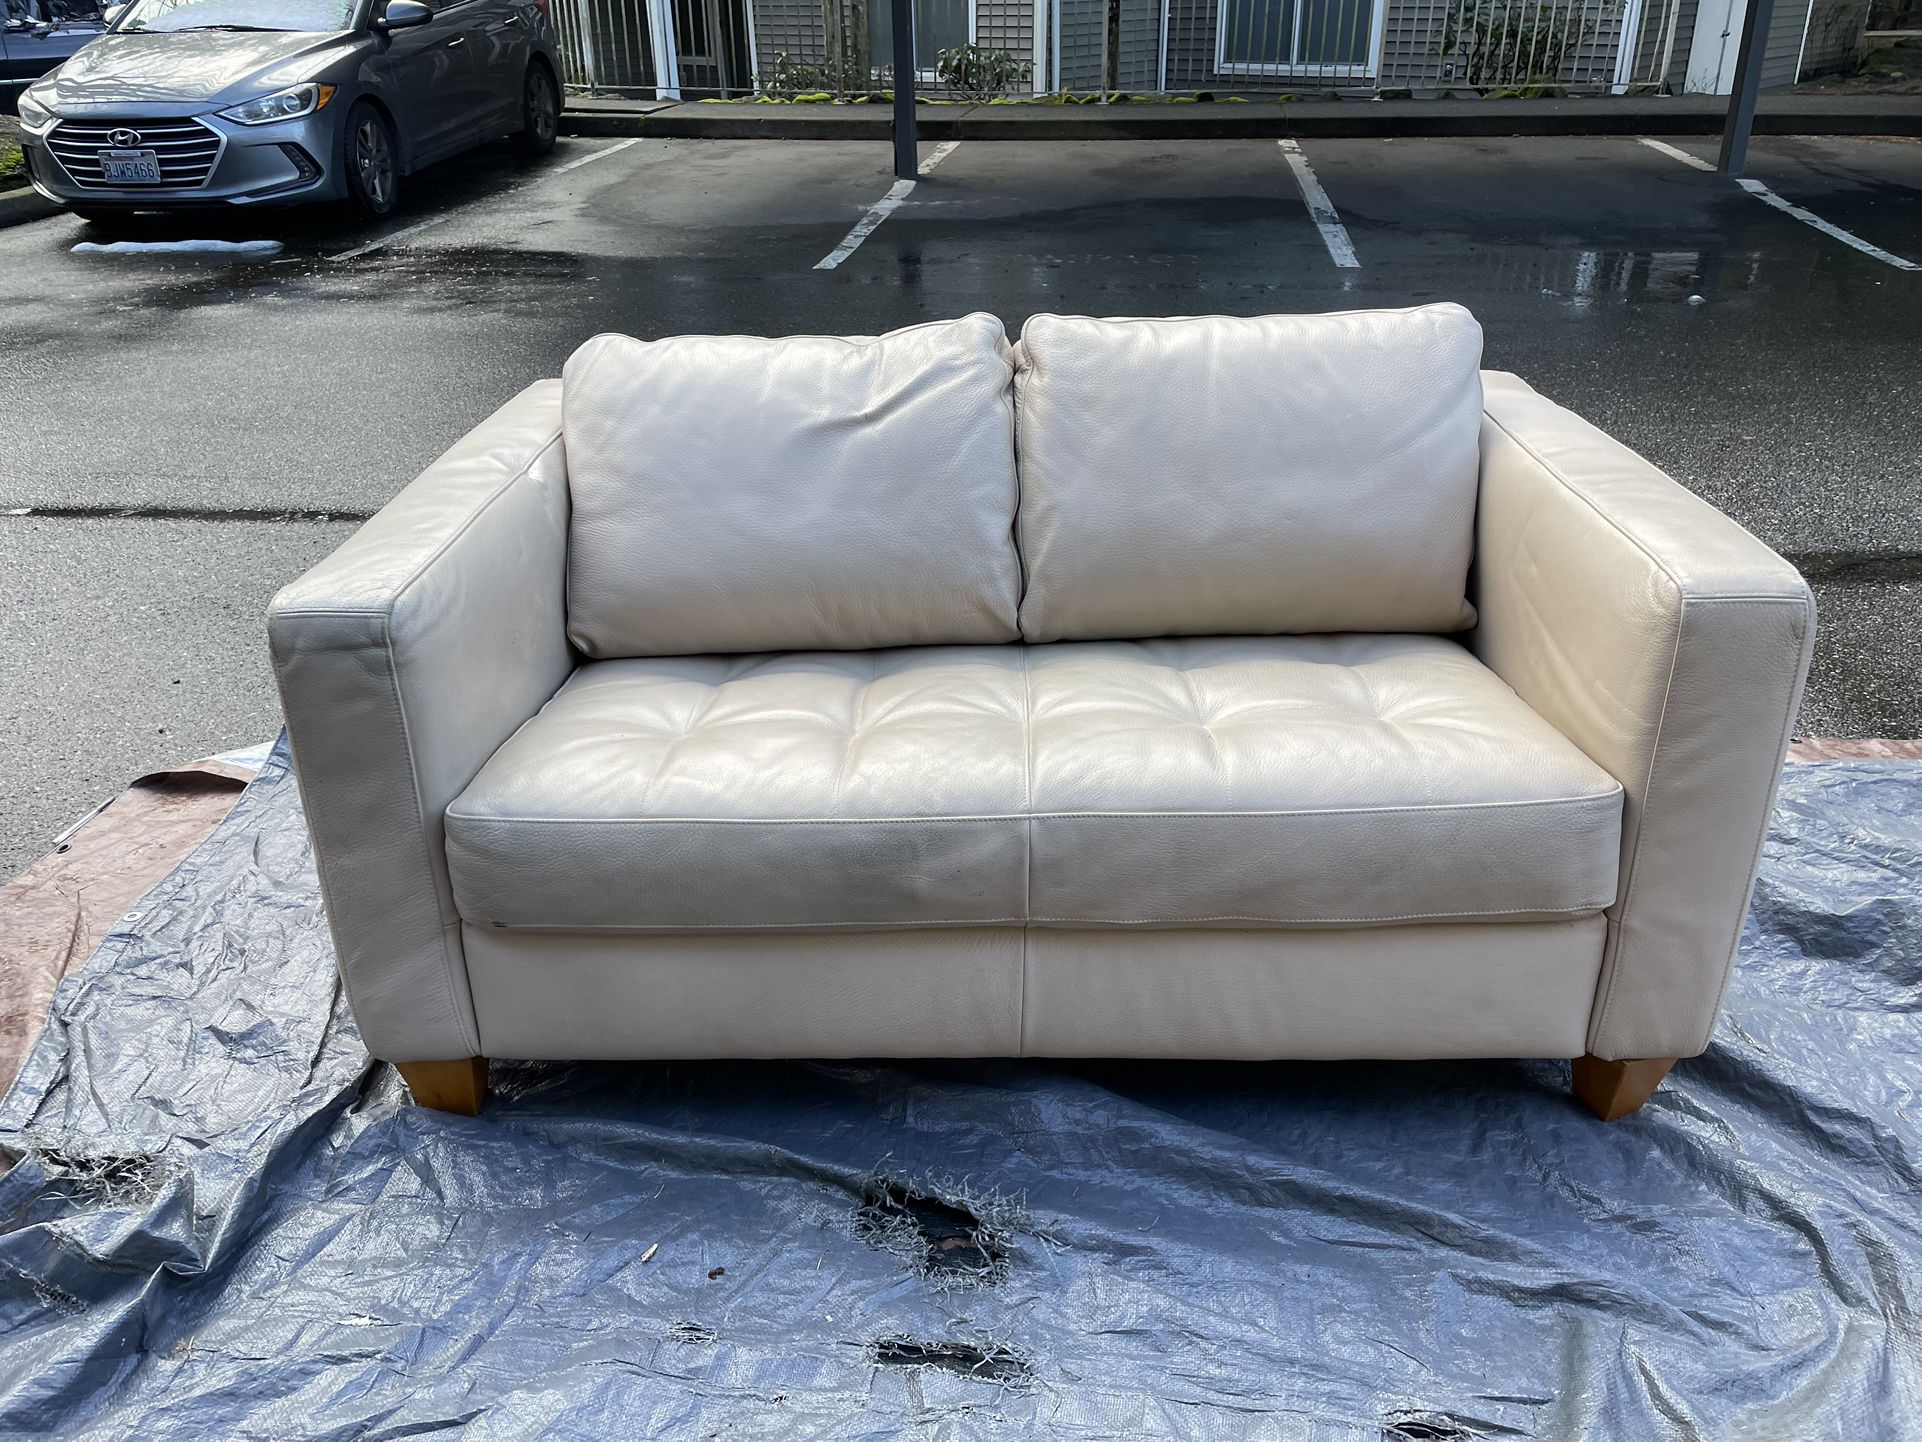 Beige Leather Couch/Loveseat